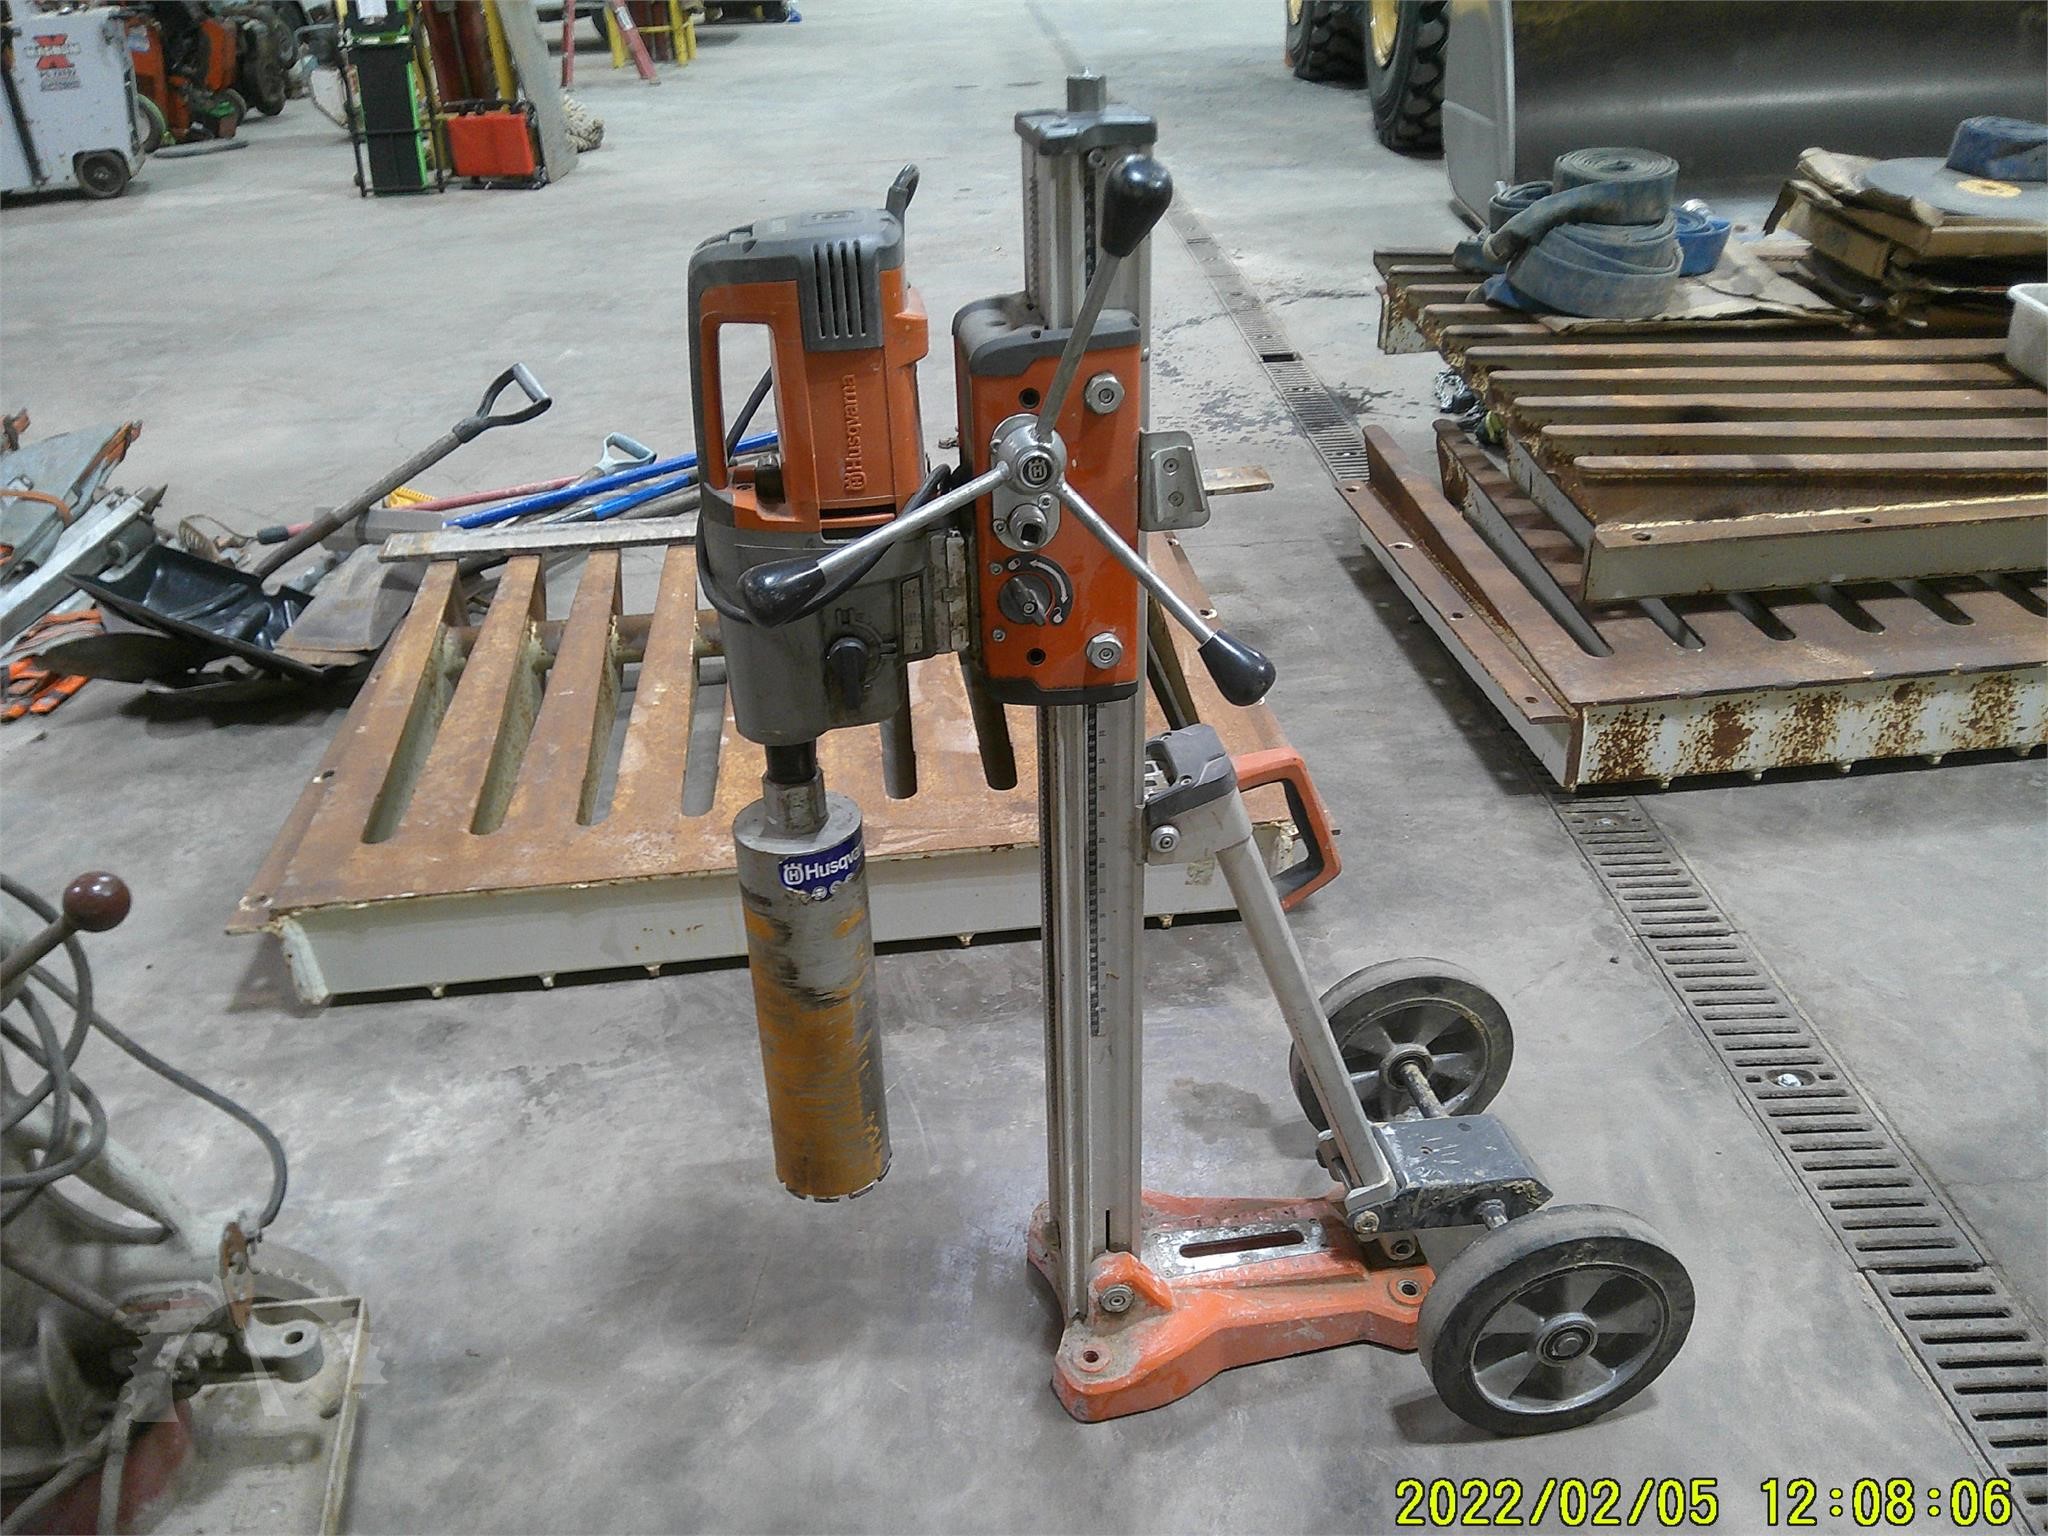 4PC) (2) Milwaukee Furniture Rollers and (2) Foldable Stools - Sierra  Auction Management Inc